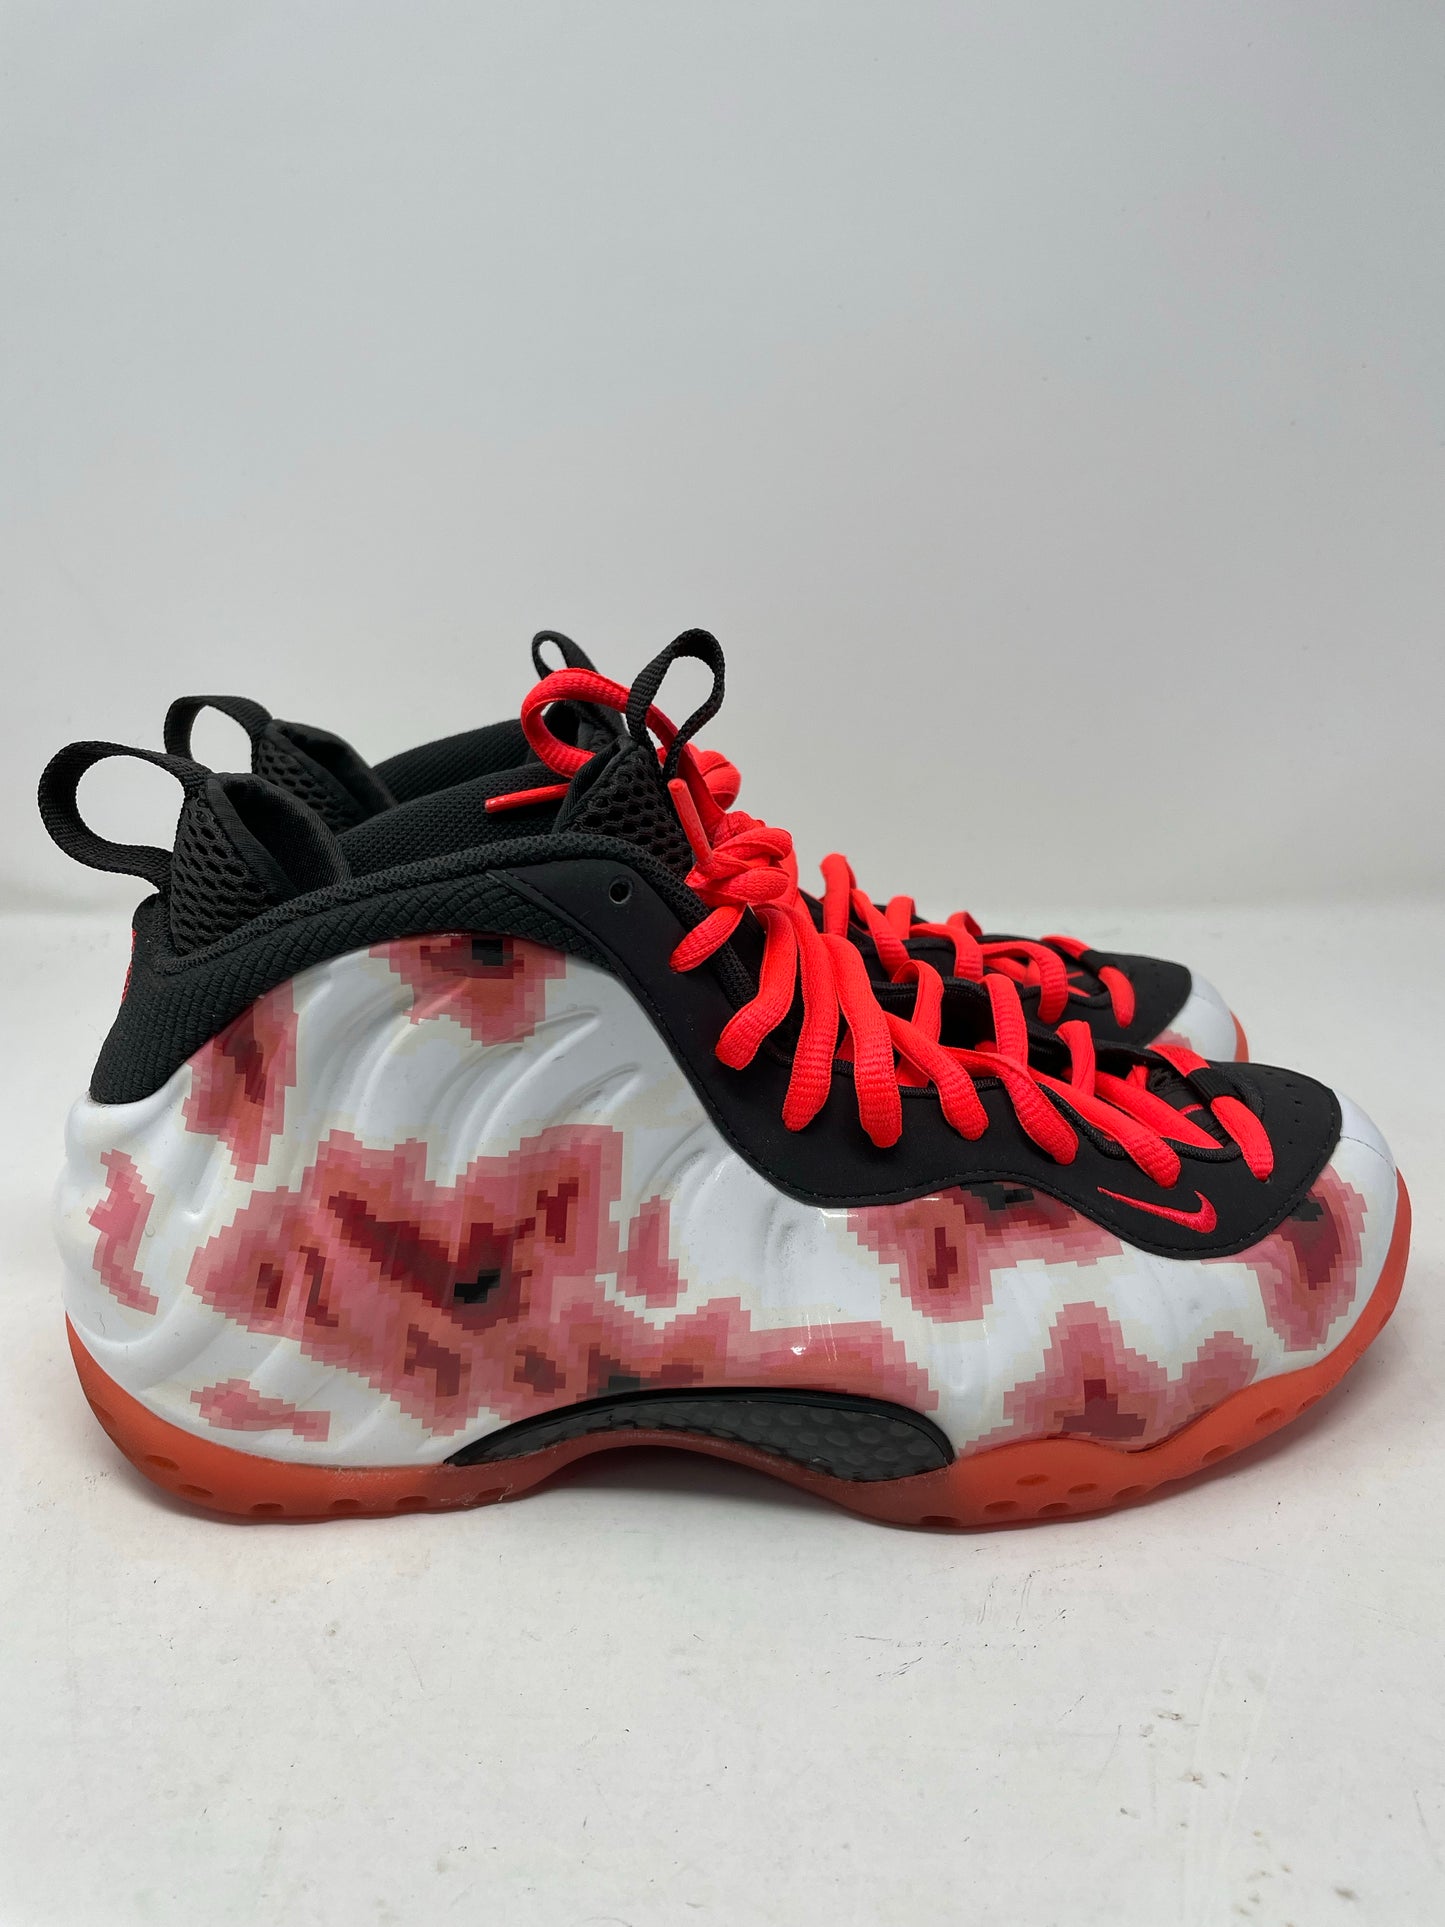 Nike Air Foamposite One Thermal Map Sz 9.5